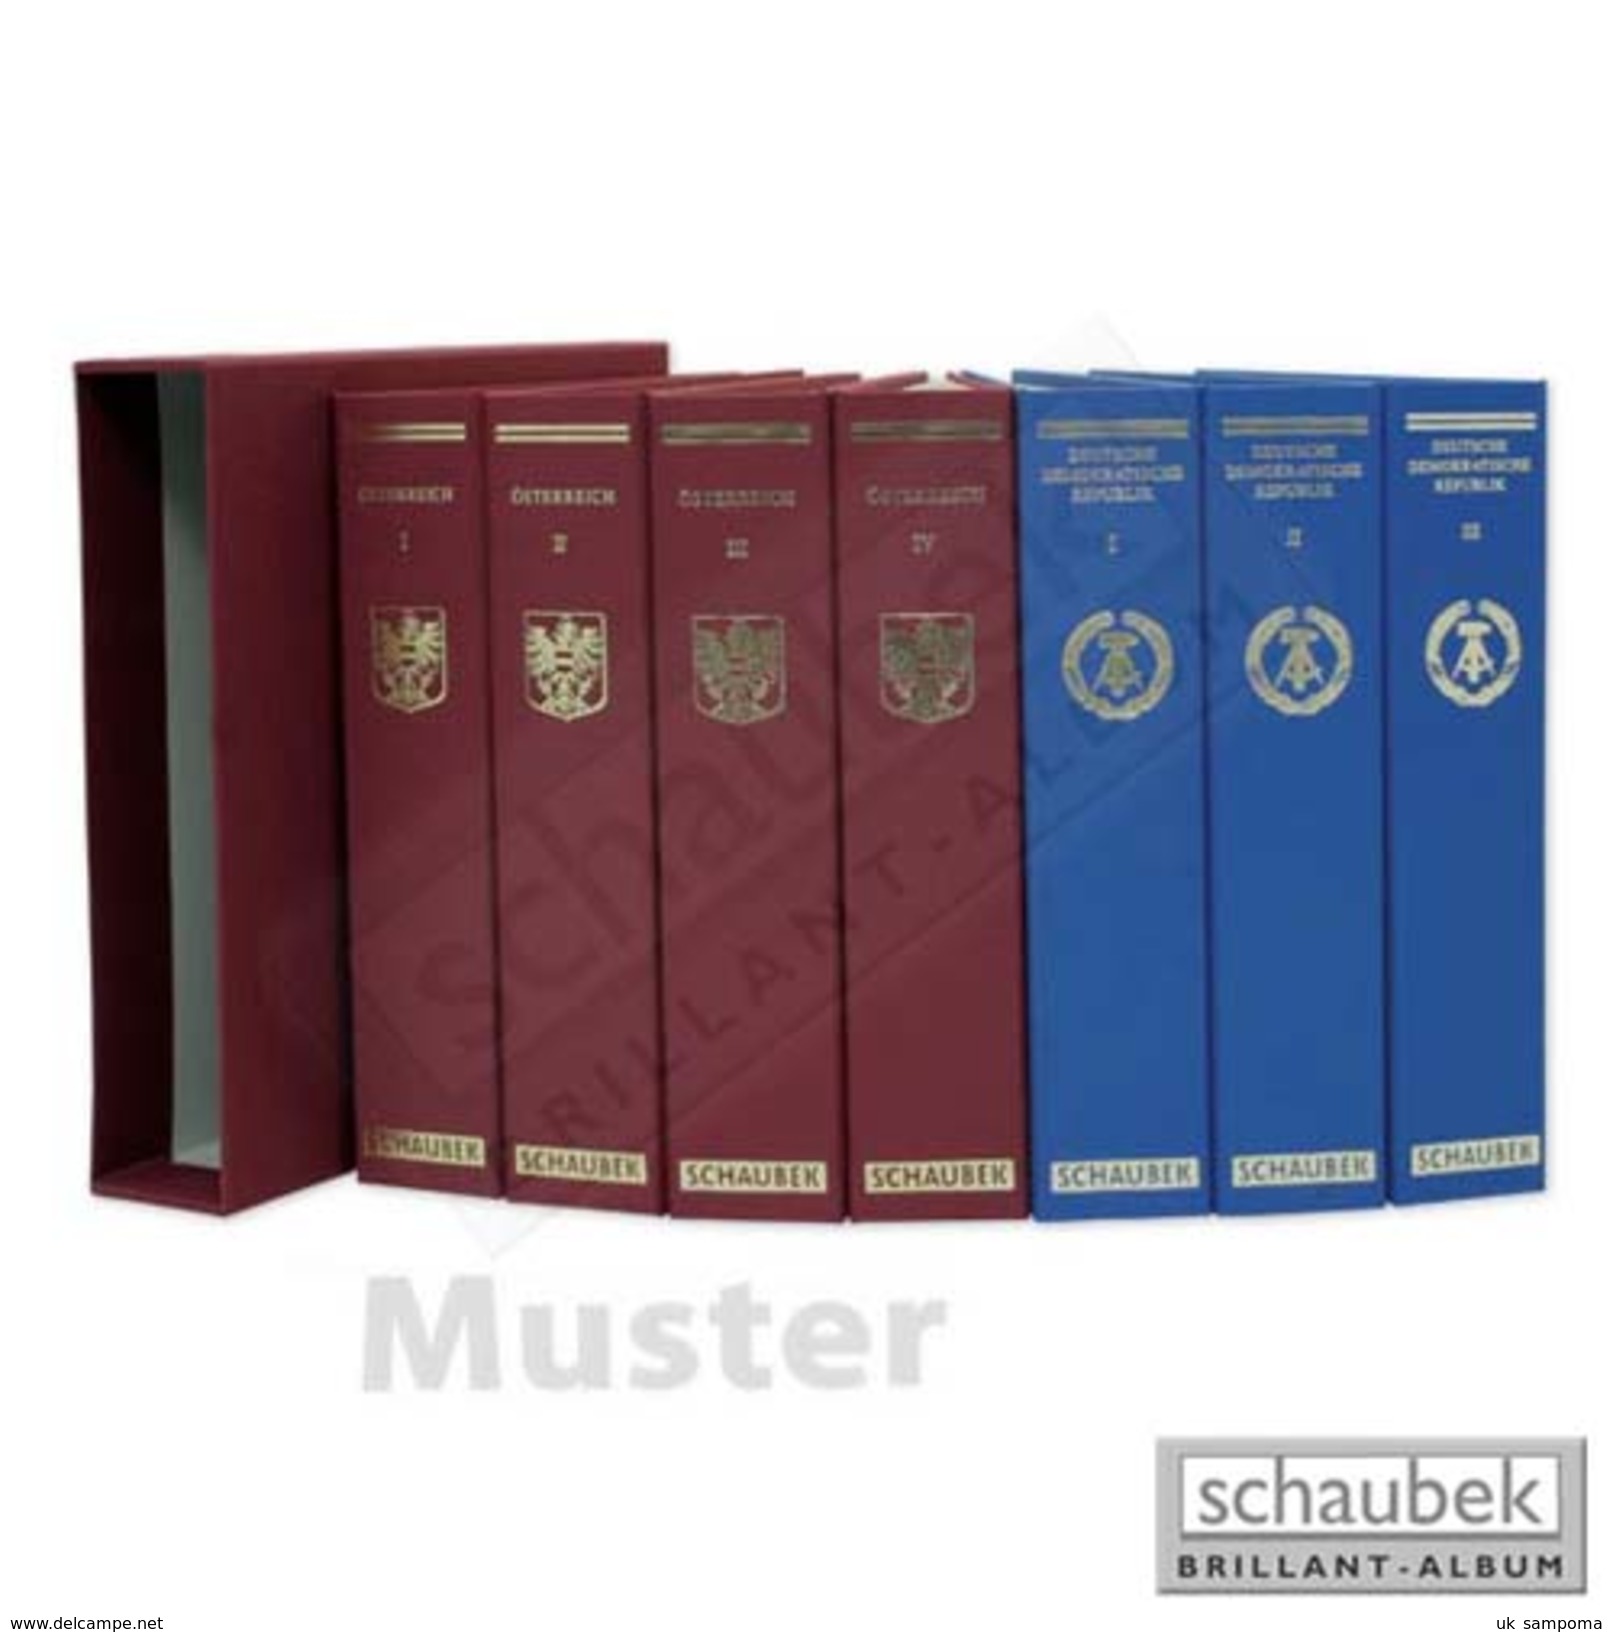 Schaubek A-823/04B Album Soviet Union 1970-1974 Brillant, In A Blue Screw Post Binder, Vol. IV, Without Slipcase - Binders With Pages